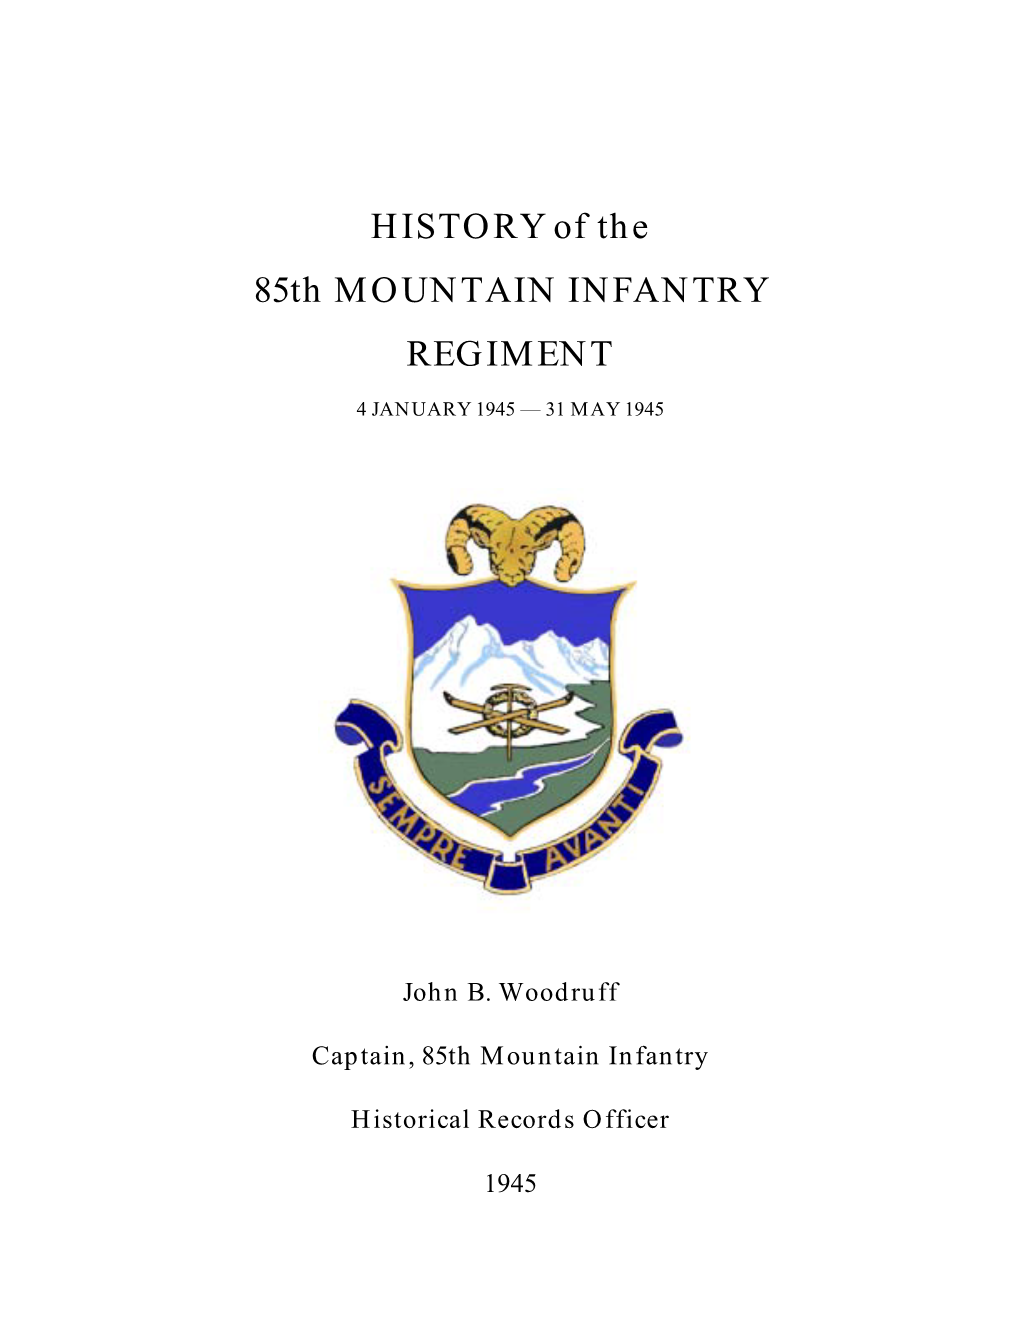 HISTORY of the 85Th MOUNTAIN INFANTRY REGIMENT